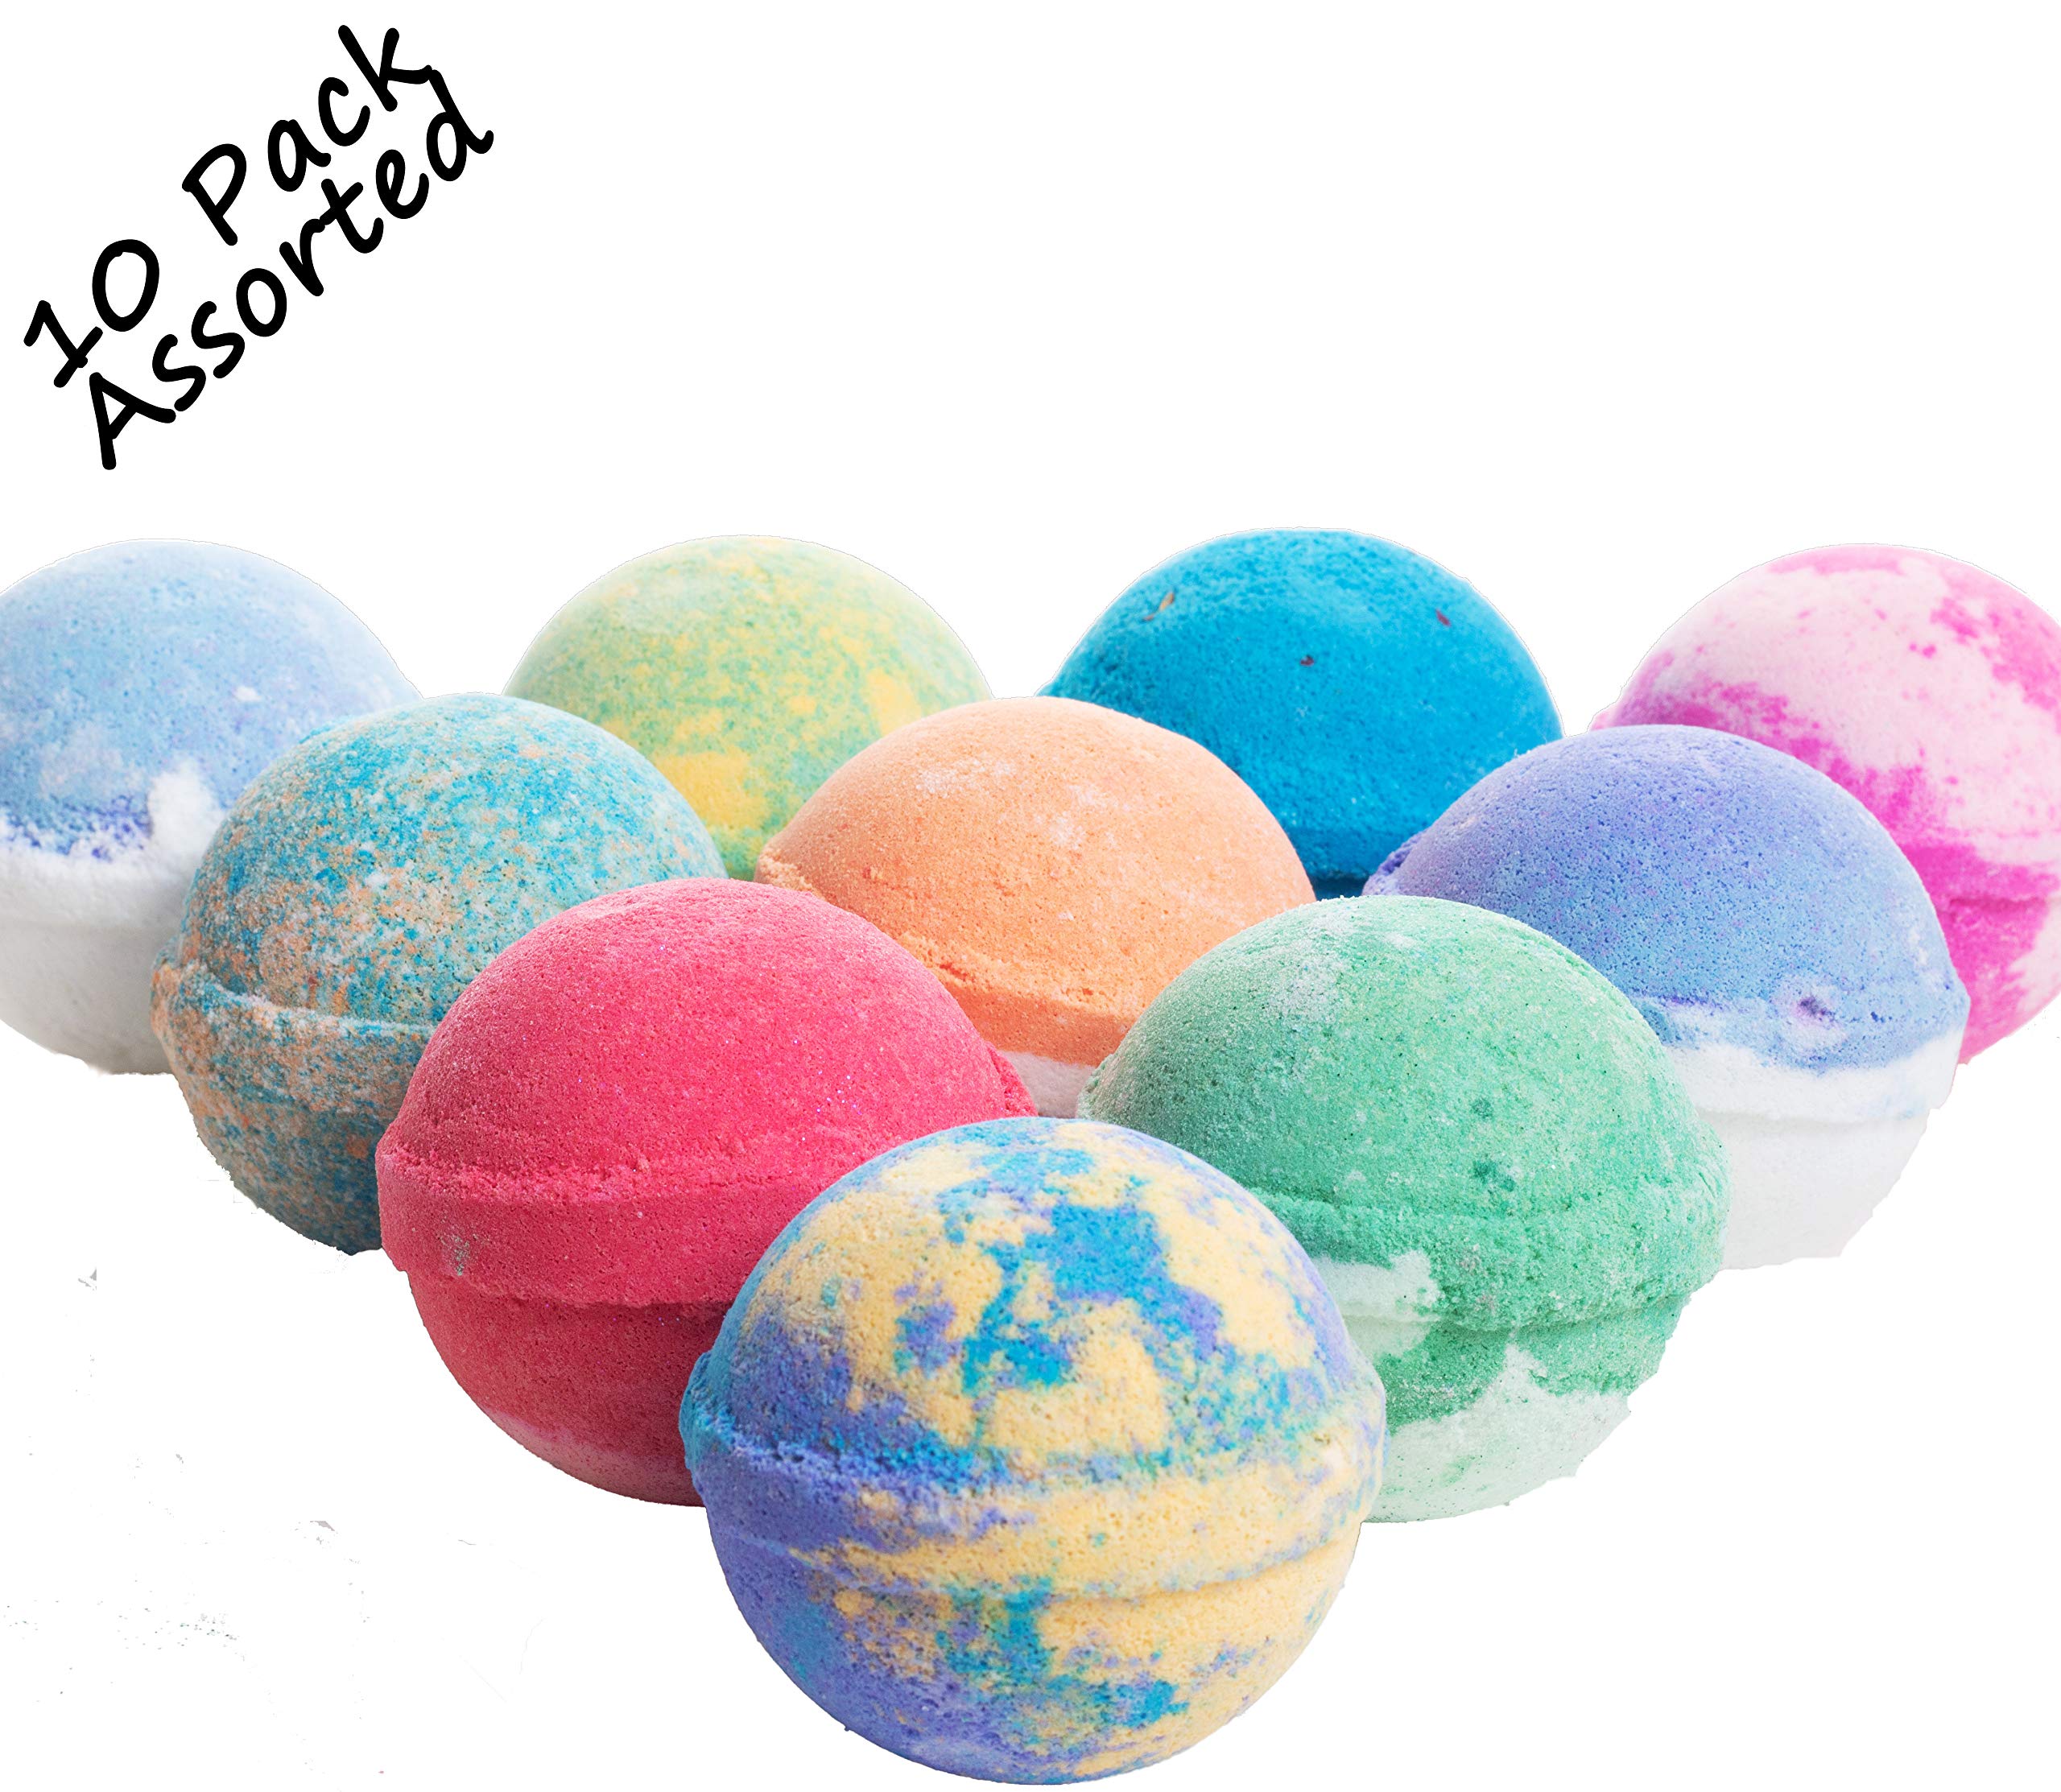 360Feel Bath Bombs Gift Set 10 Large USA made -Made with Essential Oil -All Natural Organic Bath Fizzies- Gift ready box - Aromatherapy Organic Bath Bomb for Women Men and Kids - Gift ready box